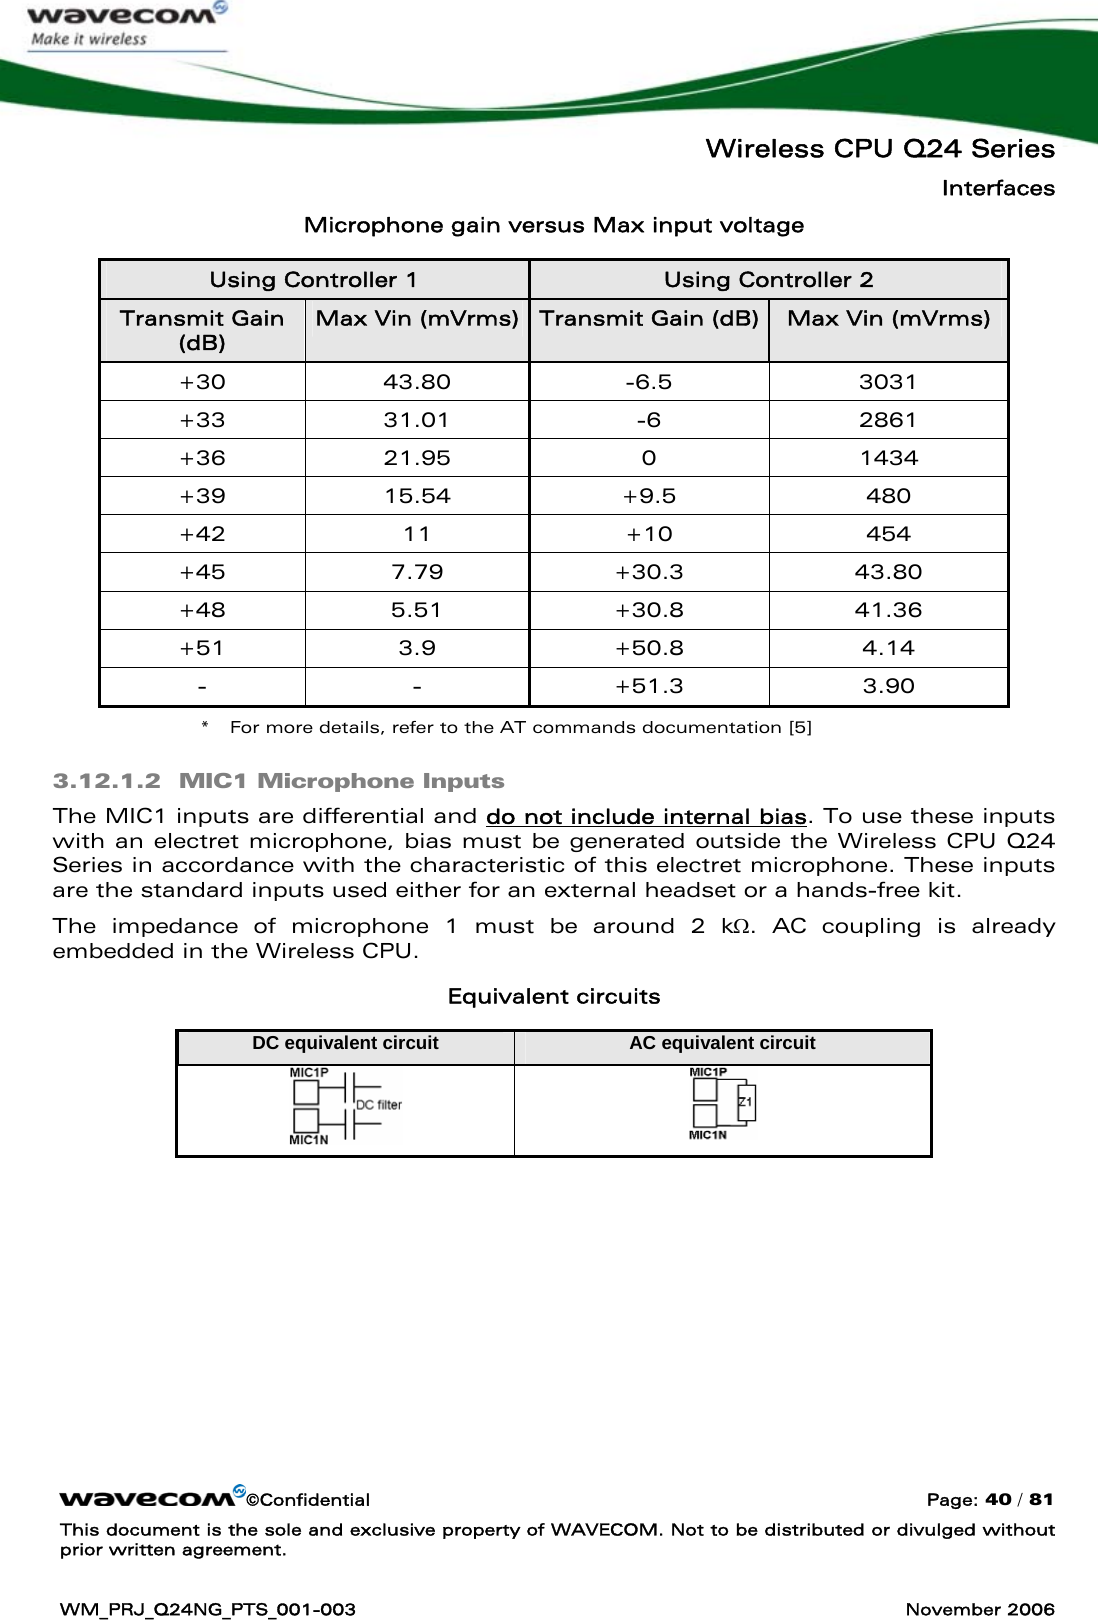   Wireless CPU Q24 Series Interfaces ©Confidential  Page: 40 / 81 This document is the sole and exclusive property of WAVECOM. Not to be distributed or divulged without prior written agreement.  WM_PRJ_Q24NG_PTS_001-003  November 2006  Microphone gain versus Max input voltage Using Controller 1  Using Controller 2 Transmit Gain (dB) Max Vin (mVrms) Transmit Gain (dB) Max Vin (mVrms) +30 43.80  -6.5  3031 +33 31.01  -6  2861 +36 21.95  0  1434 +39 15.54  +9.5  480 +42 11  +10  454 +45 7.79  +30.3  43.80 +48 5.51  +30.8  41.36 +51 3.9  +50.8  4.14 - - +51.3 3.90 *  For more details, refer to the AT commands documentation [5] 3.12.1.2  MIC1 Microphone Inputs The MIC1 inputs are differential and do not include internal bias. To use these inputs with an electret microphone, bias must be generated outside the Wireless CPU Q24 Series in accordance with the characteristic of this electret microphone. These inputs are the standard inputs used either for an external headset or a hands-free kit.  The impedance of microphone 1 must be around 2 kΩ. AC coupling is already embedded in the Wireless CPU. Equivalent circuits DC equivalent circuit  AC equivalent circuit   